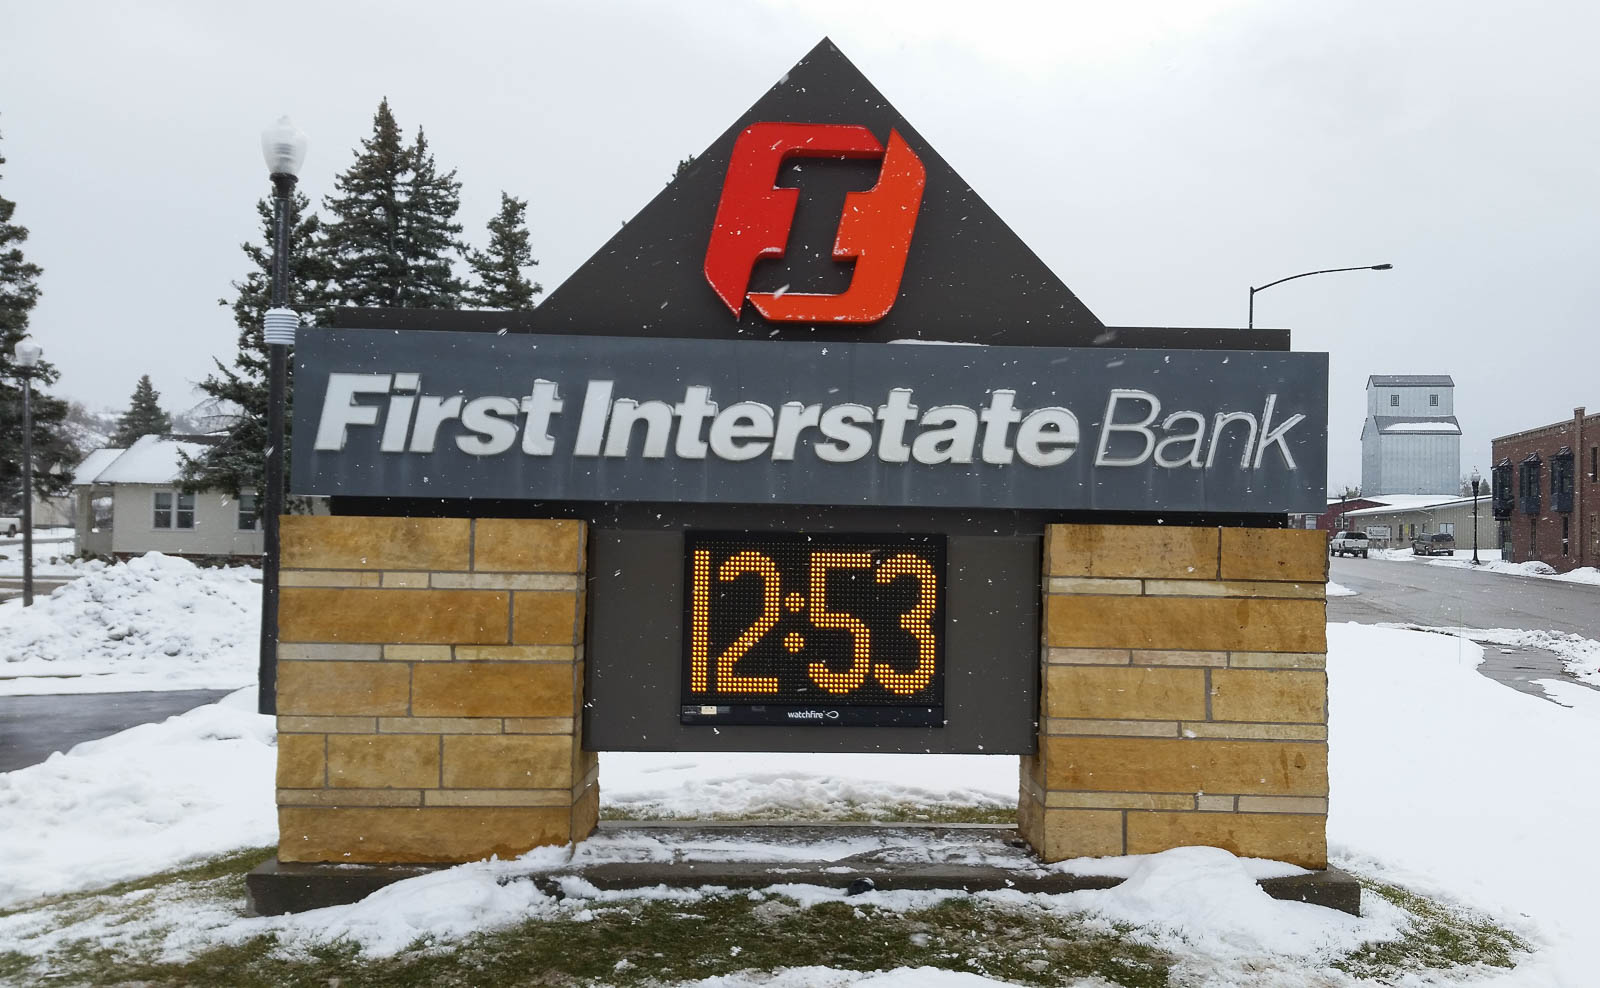 Message system for First Interstate Bank